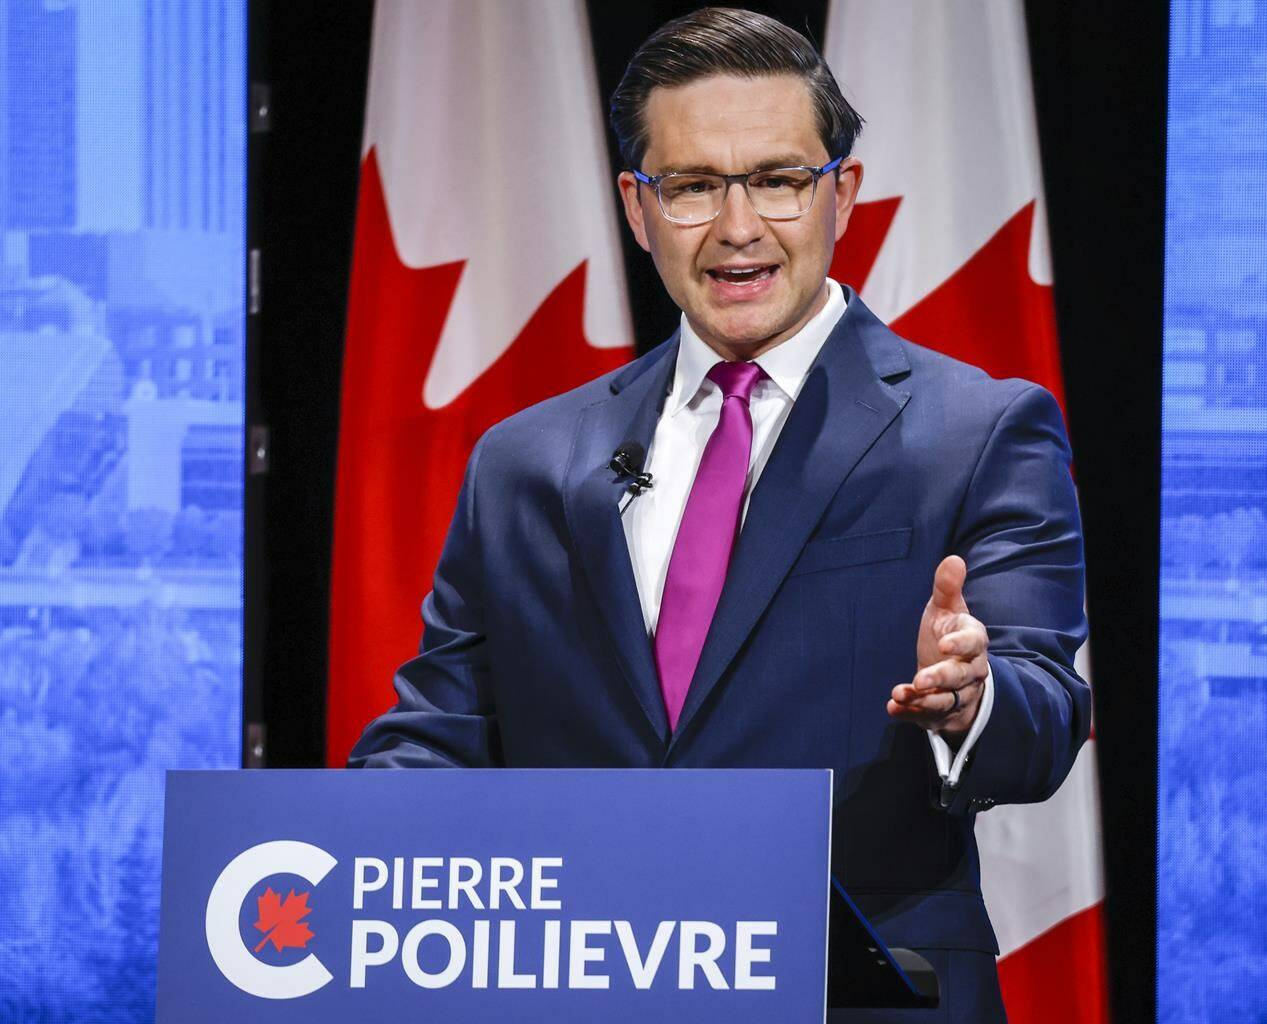 Candidate Pierre Poilievre makes a point at the Conservative Party of Canada English leadership debate in Edmonton, Alta., Wednesday, May 11, 2022. Poilievre is denouncing the “white replacement theory” that is believed to be a motive for a mass shooting in Buffalo, N.Y., over the weekend as “ugly and disgusting hate mongering.” THE CANADIAN PRESS/Jeff McIntosh